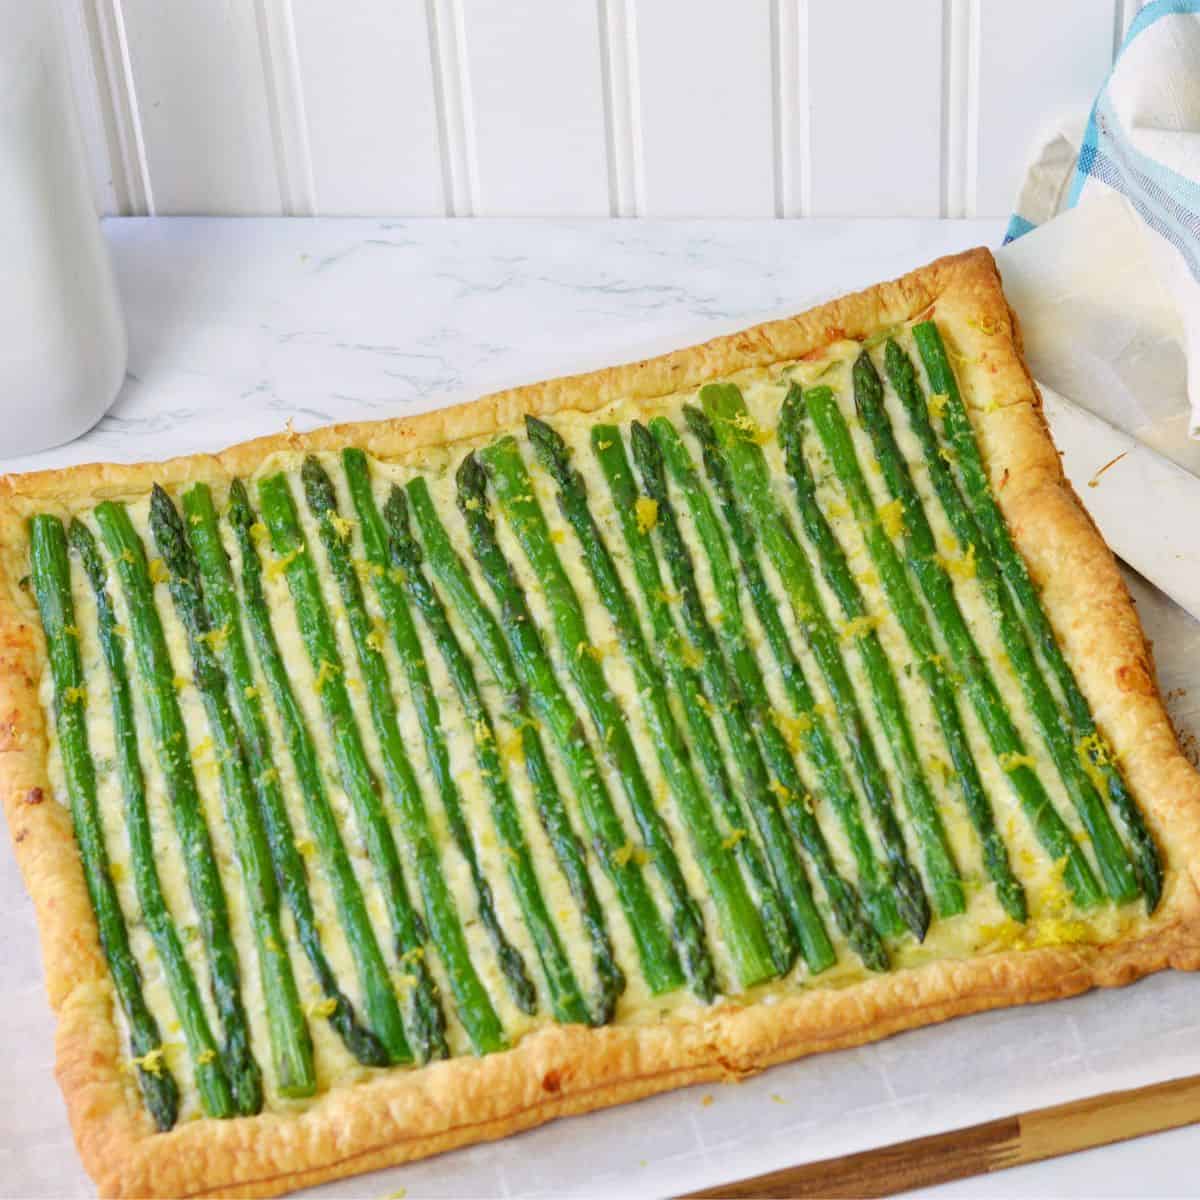 rectangle of puff pastry, cheese mixture and asparagus for featured image.